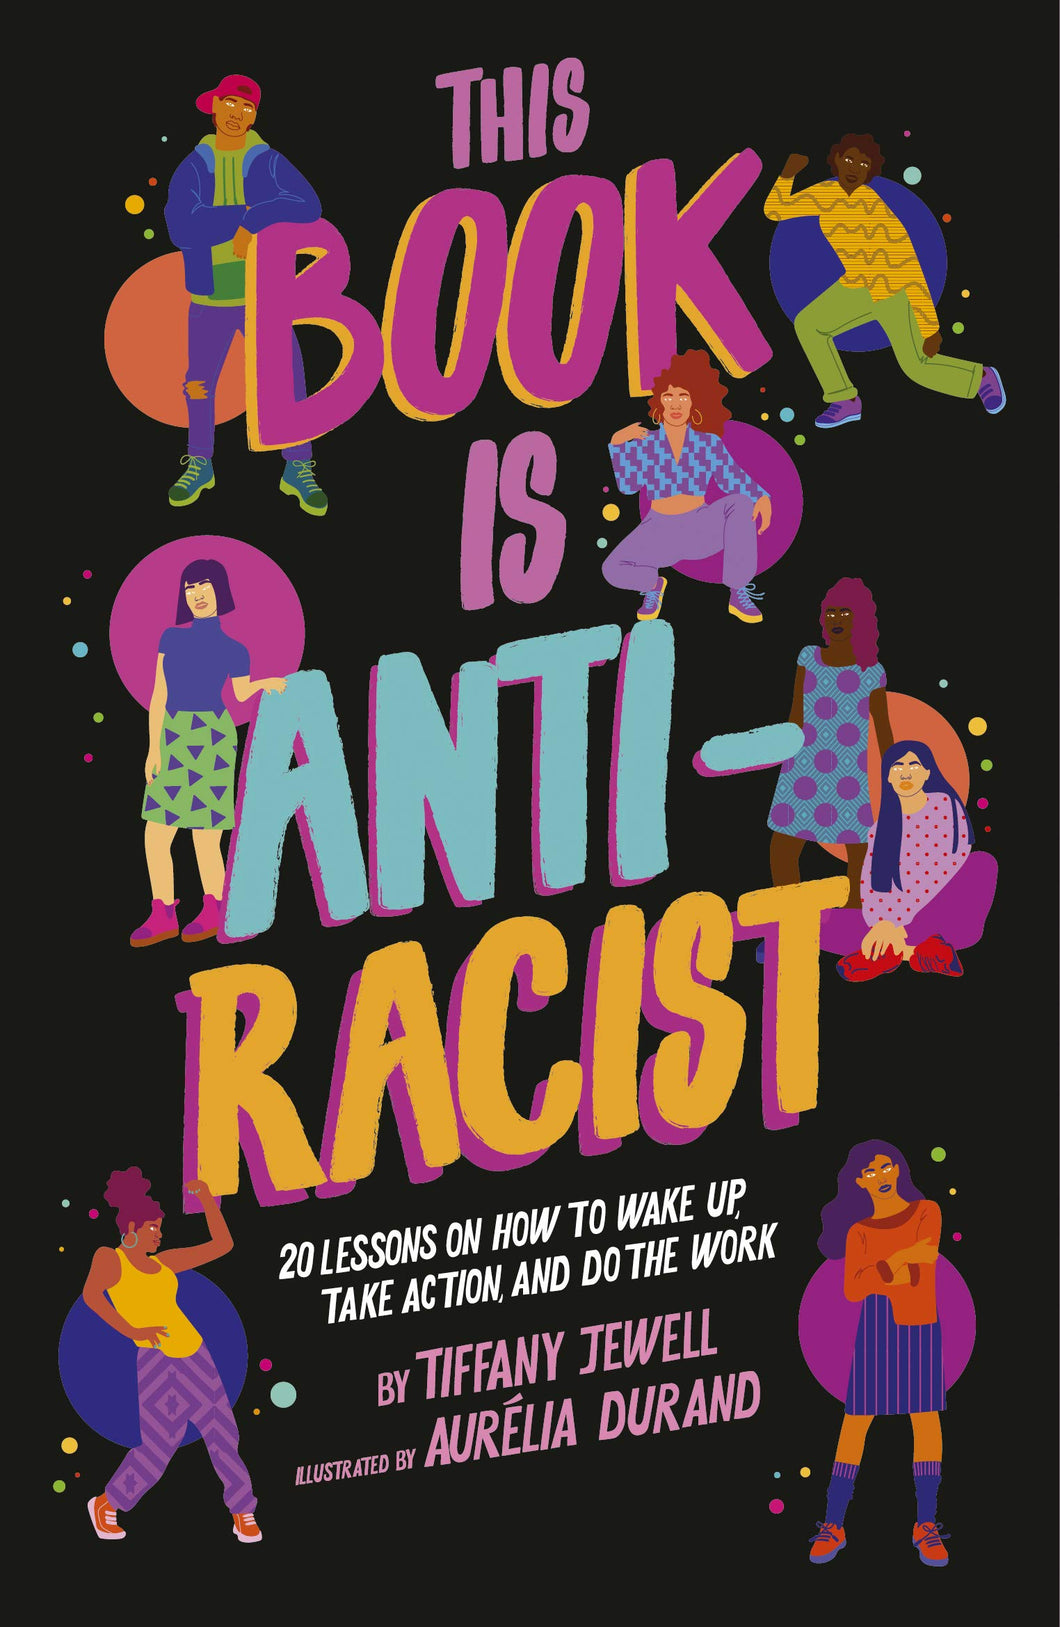 Book cover is black with title in colourful block letters. Illustrations of diverse group of people (different skin colours & genders) striking poses. Tagline reads 